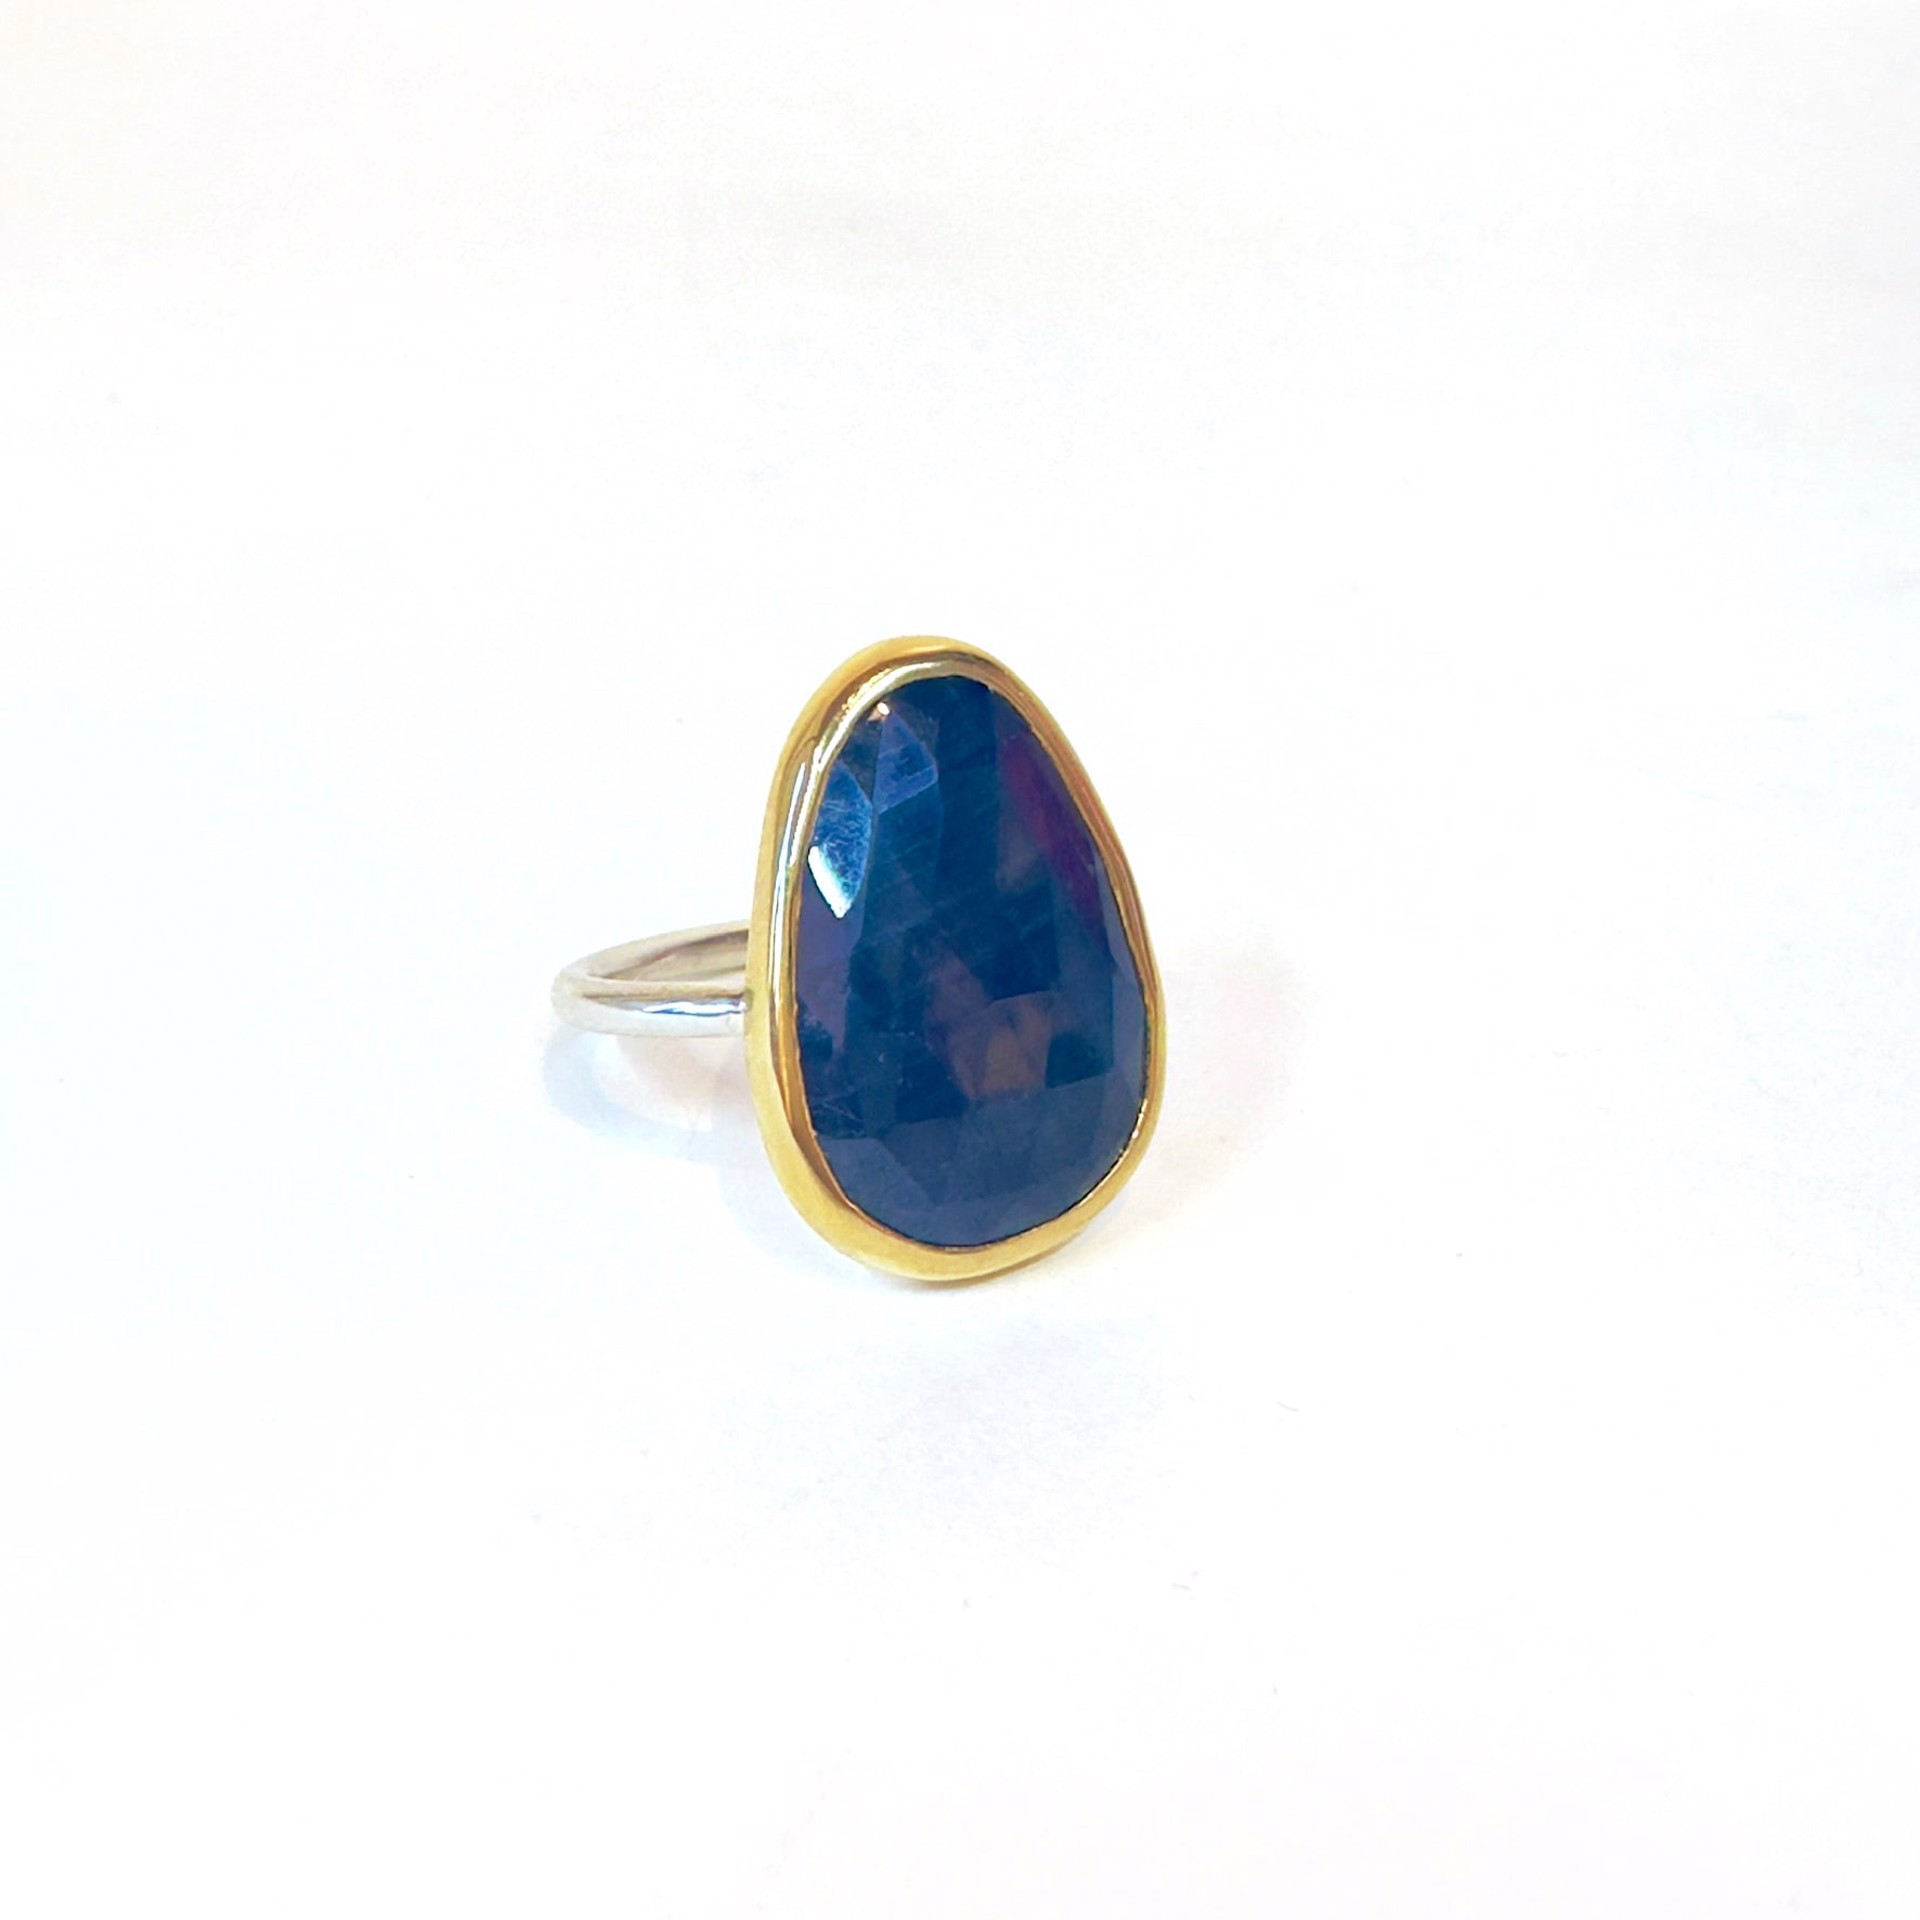 Blue Sapphire Ring with 18k gold by Sara Thompson